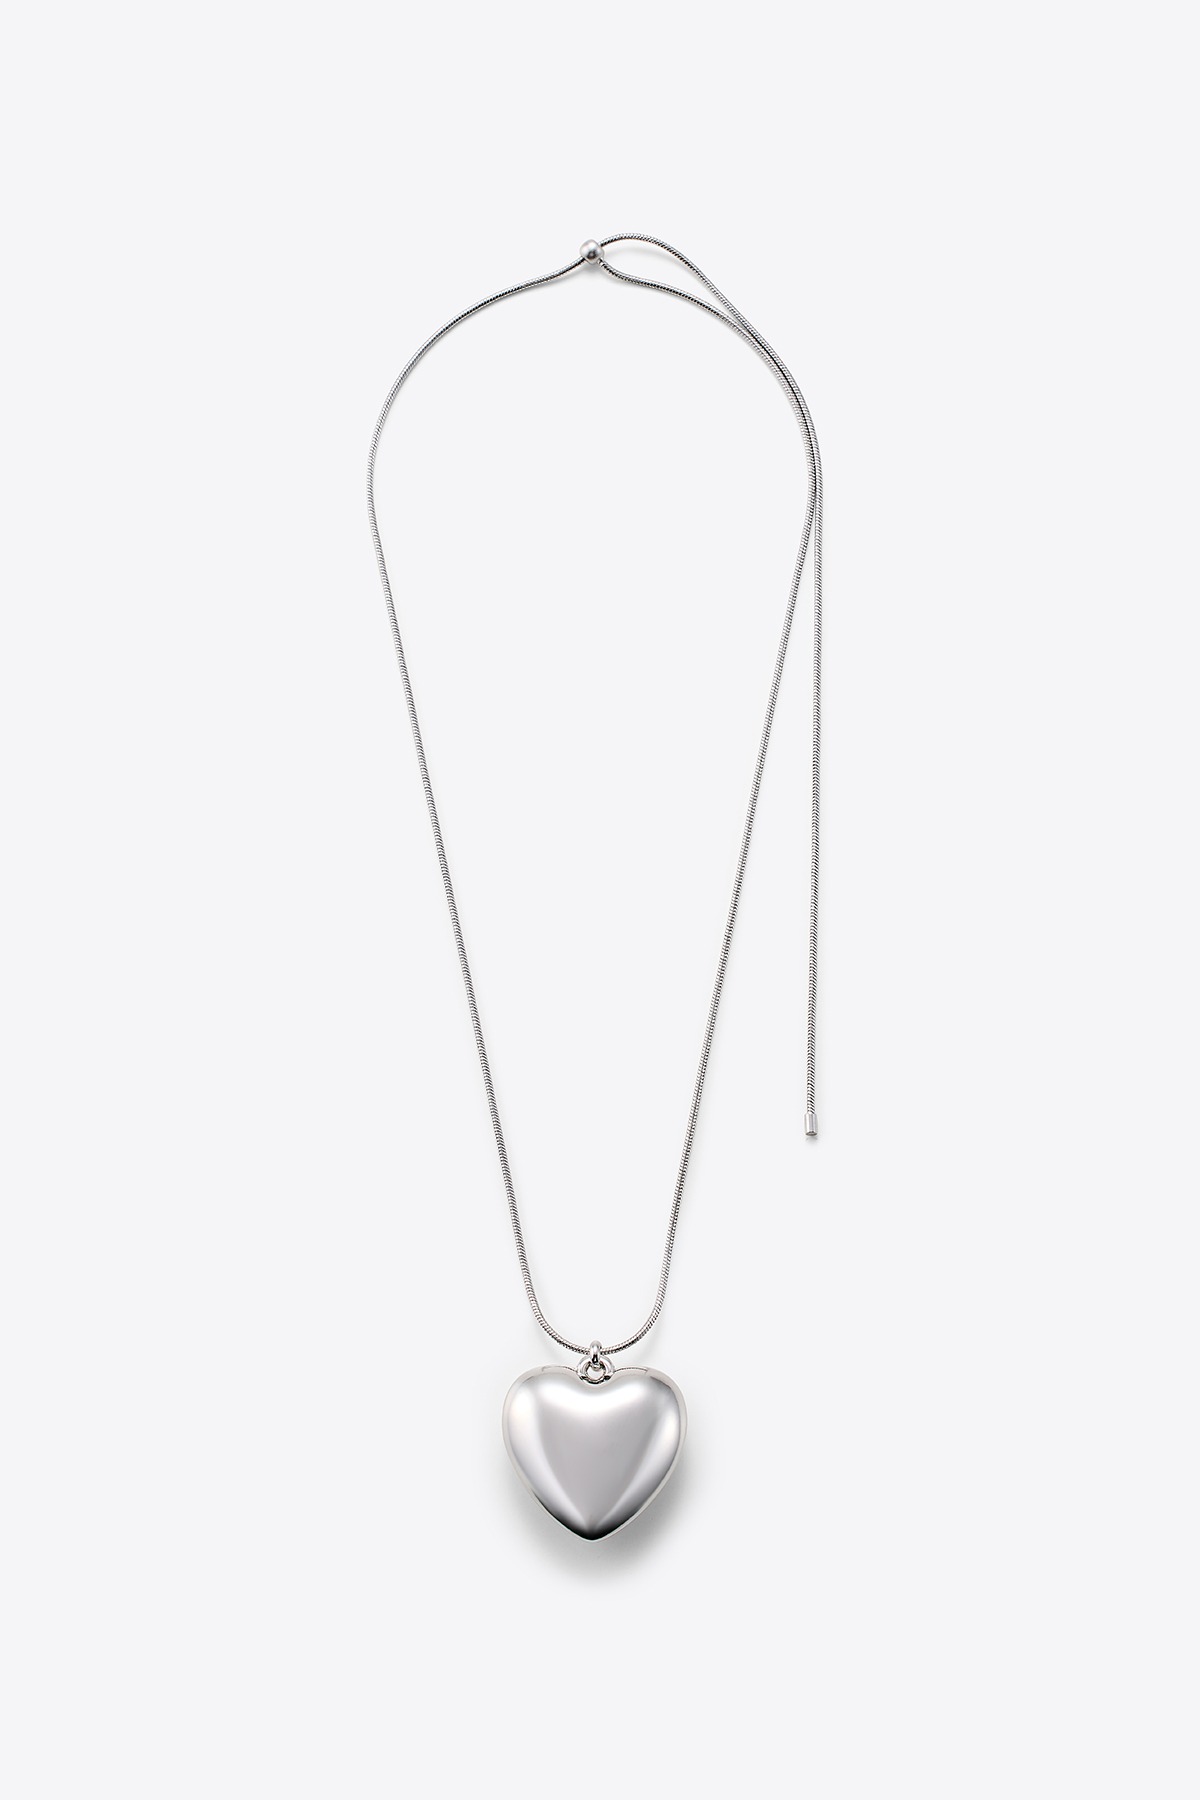 Illuminated In The Heart Necklace